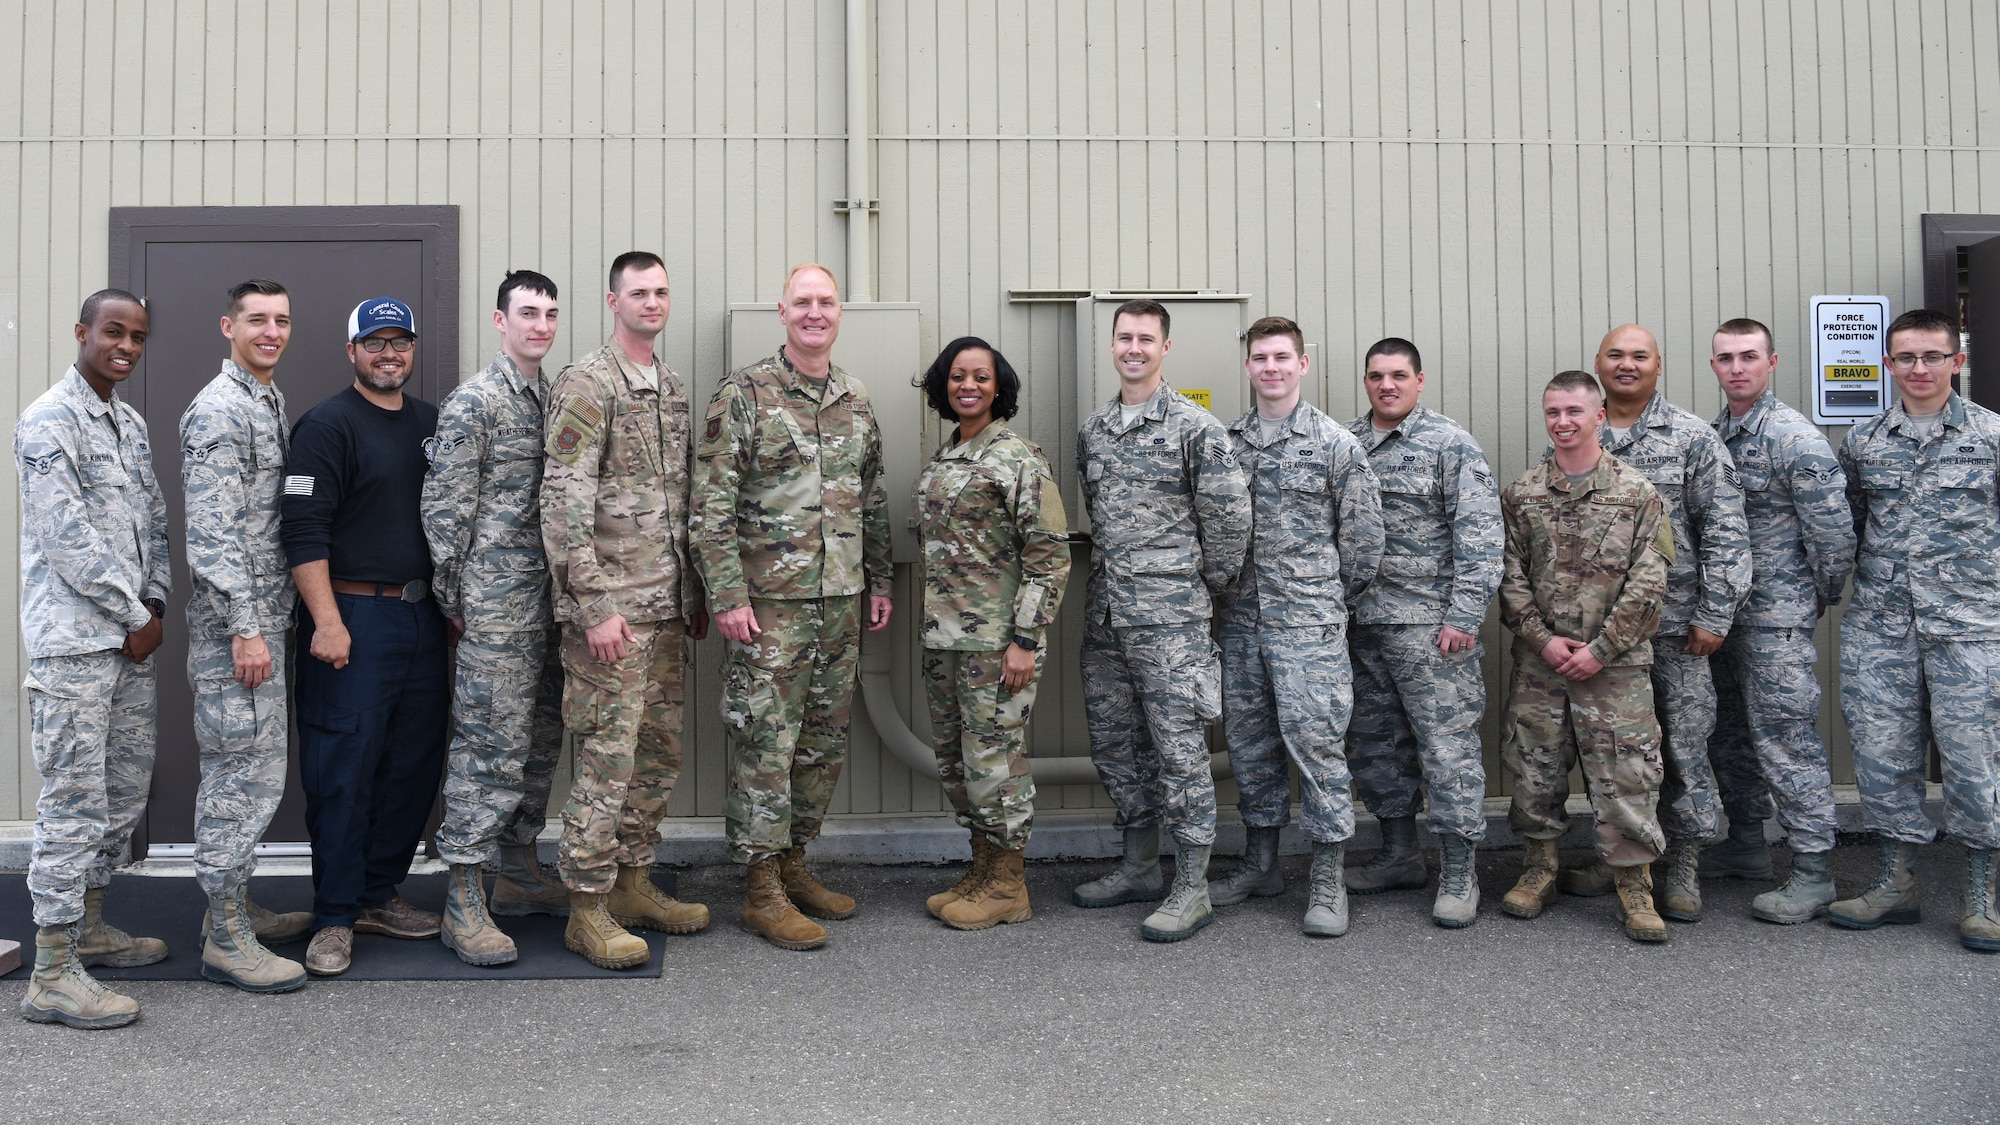 U.S. Air Force Col. Michael Hough, 30th Space Wing commander, and Chief Master Sgt. Diena Mosely, 30th Space Wing command chief, take a group photo with the 12 30th Civil Engineer Squadron Airmen March 12, 2019, at Vandenberg Air Force Base, Calif. Hough and Mosely both presented their coins to the Airmen for their tedious and tireless work when a storm hit Vandenberg AFB, March 8, 2019.